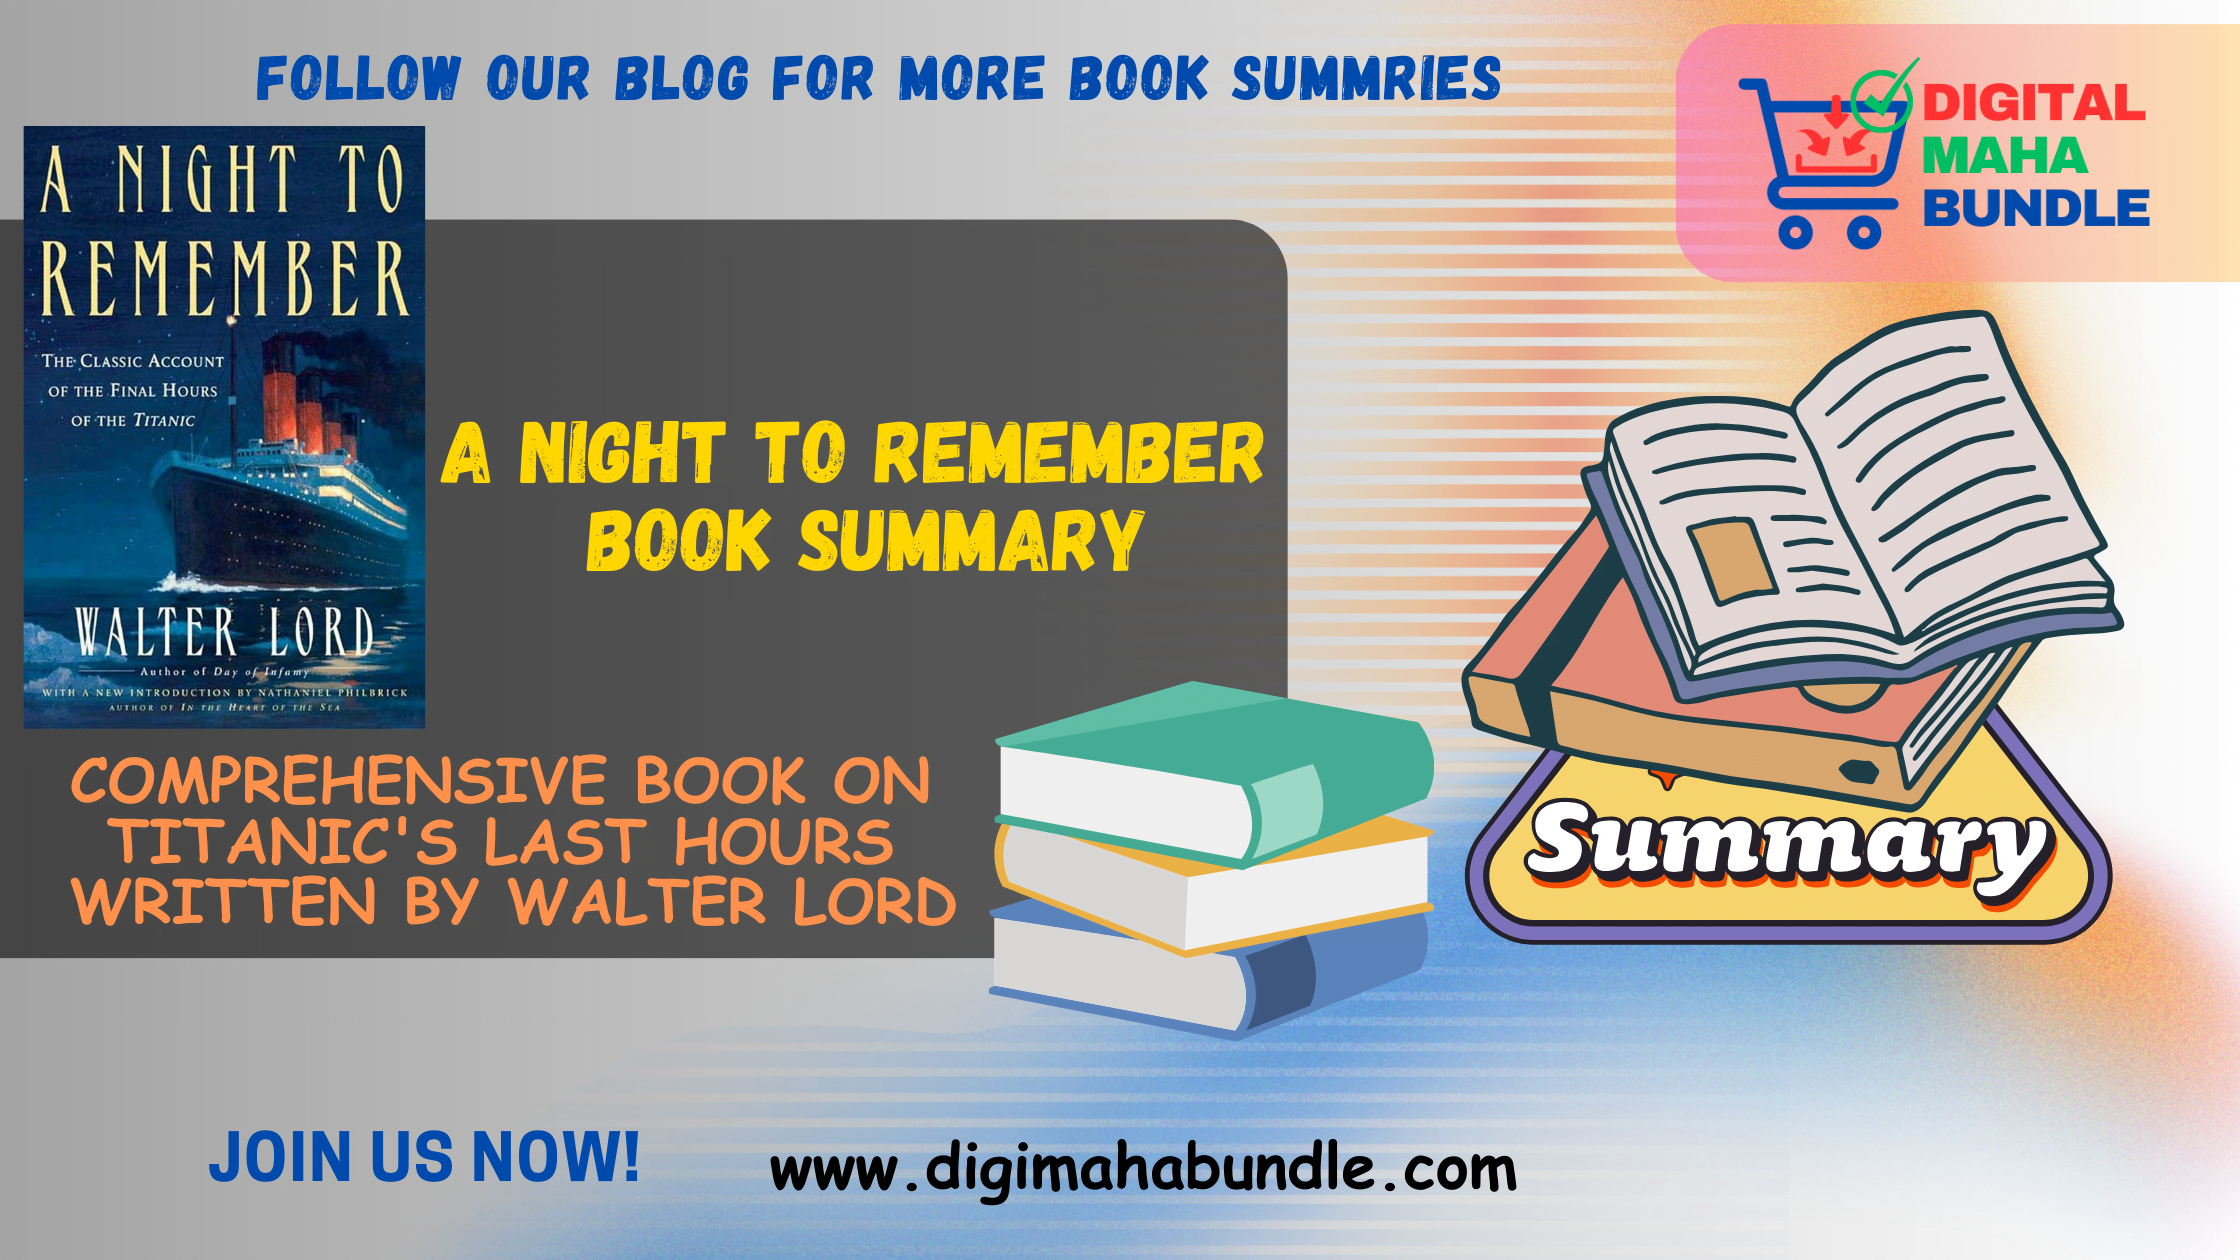 A Night to Remember book summary